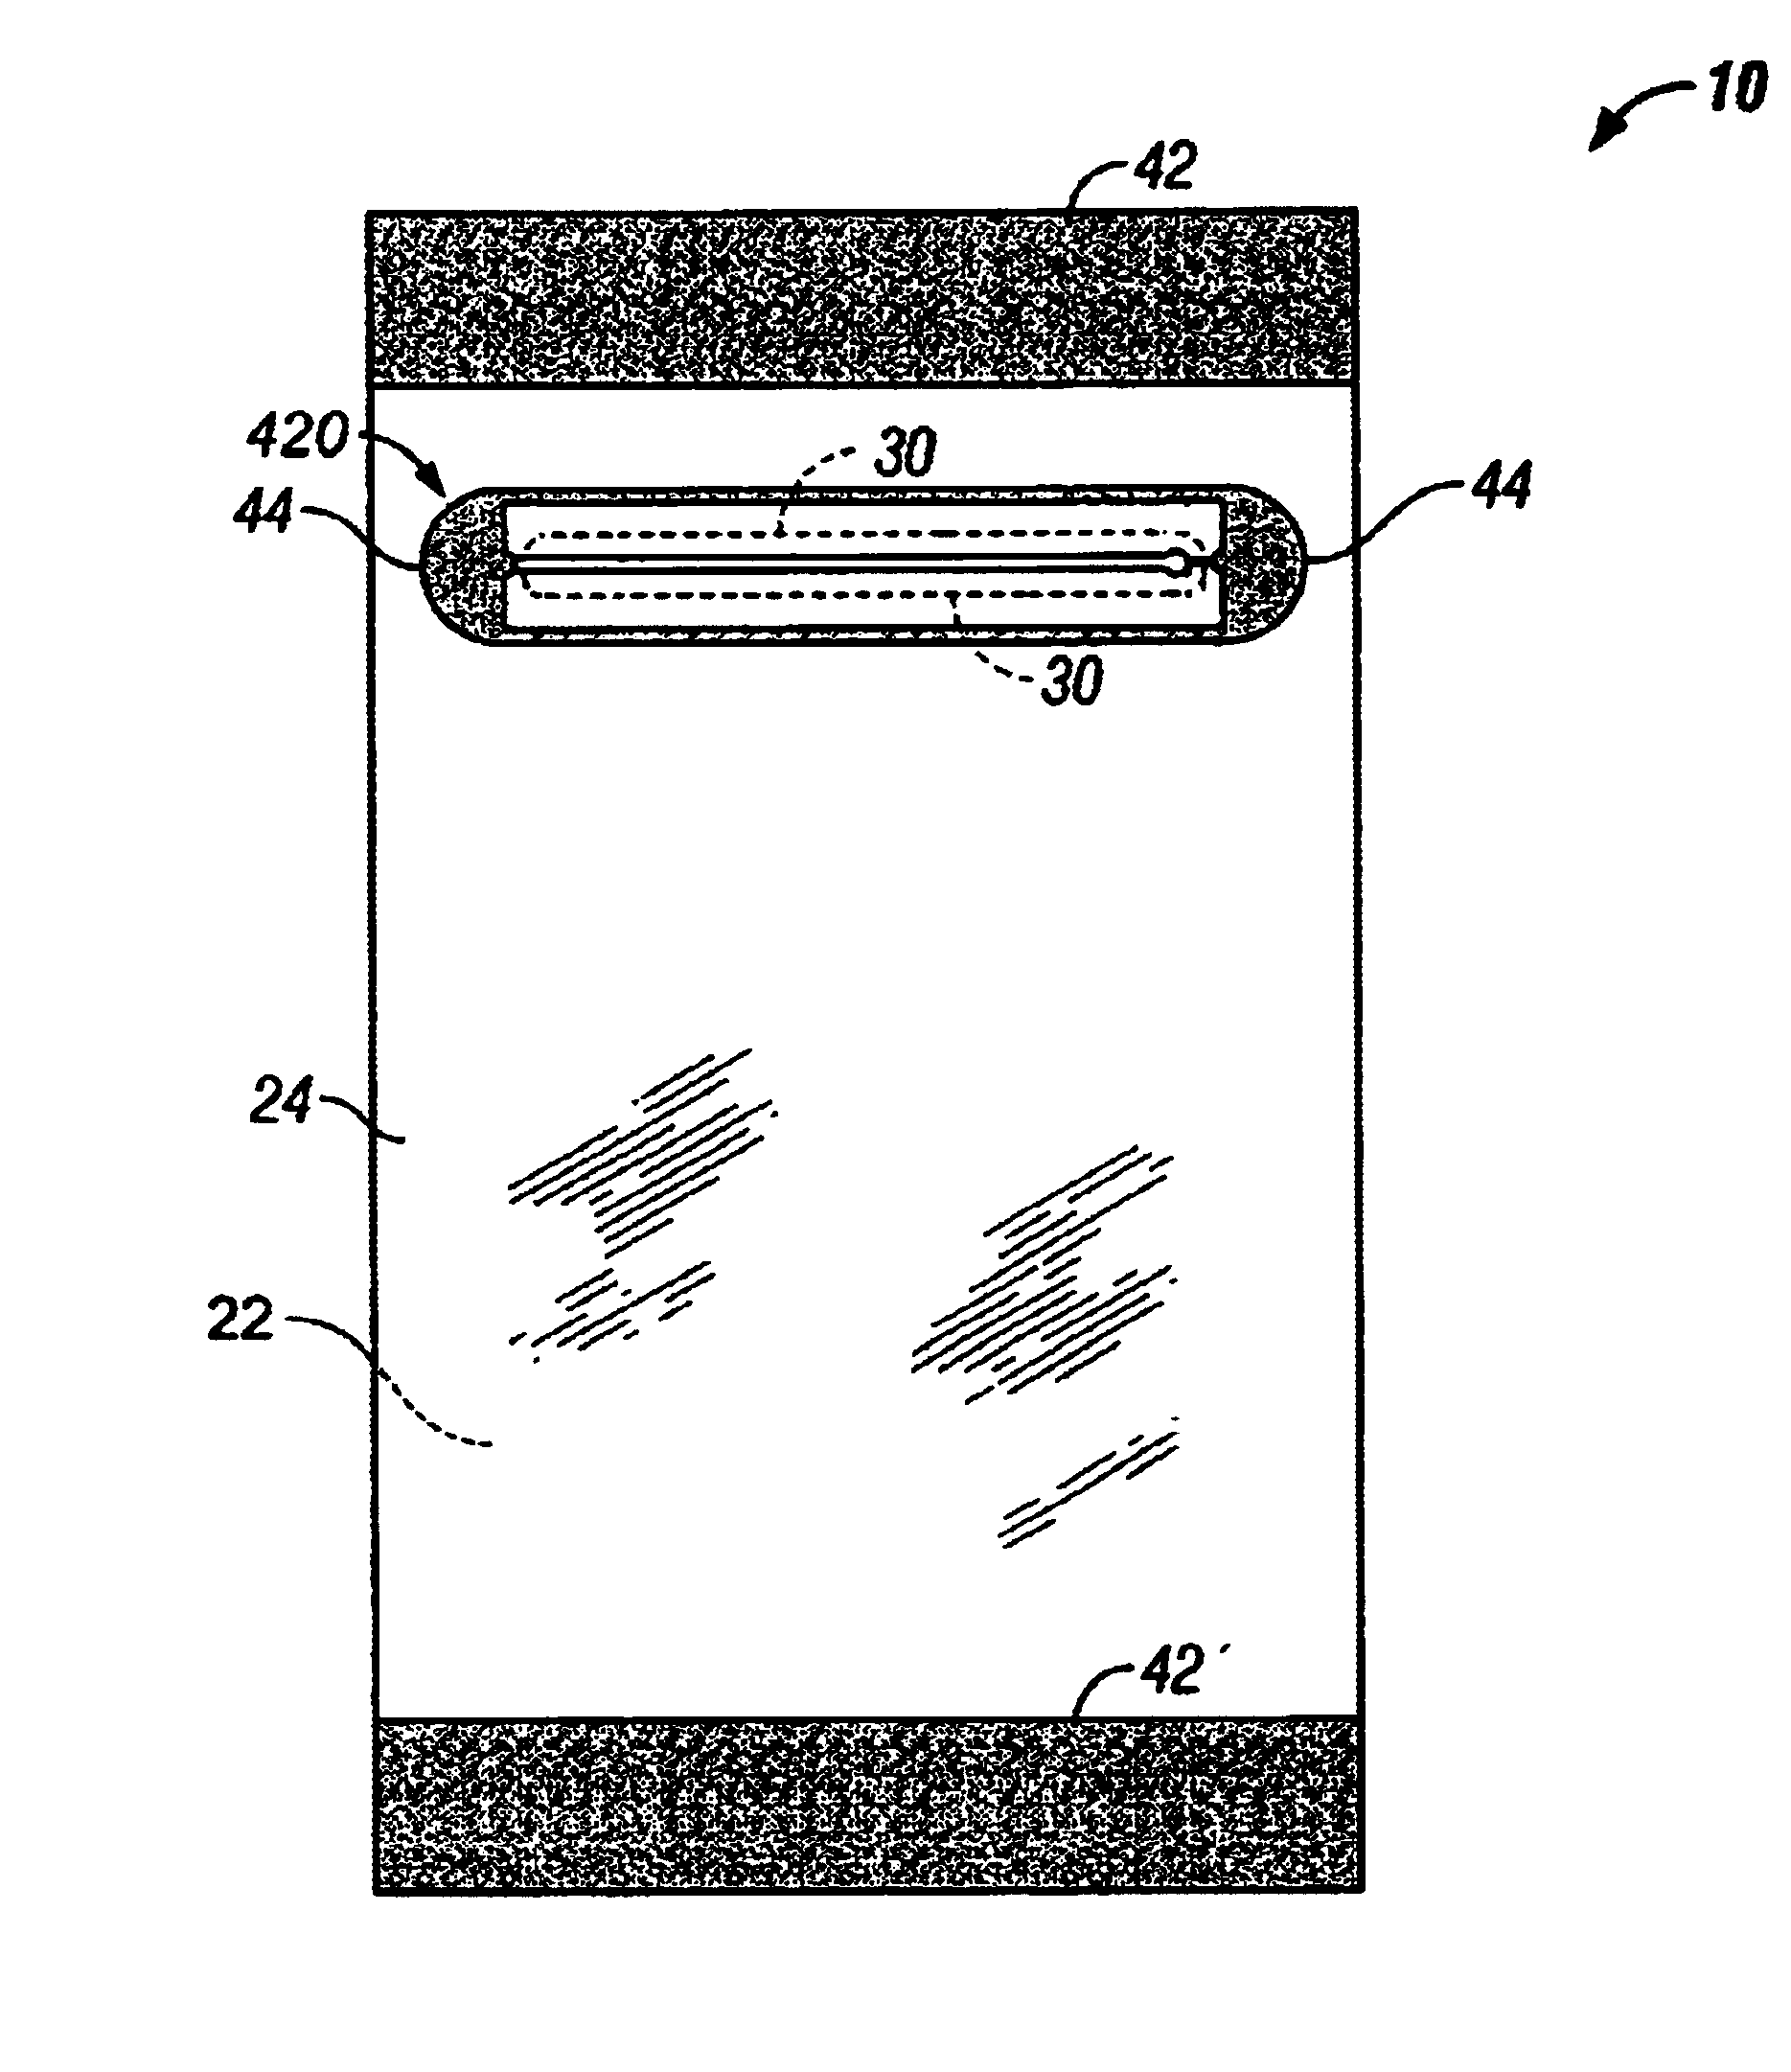 Apparatus and method for manufacturing reclosable bags utilizing zipper tape material